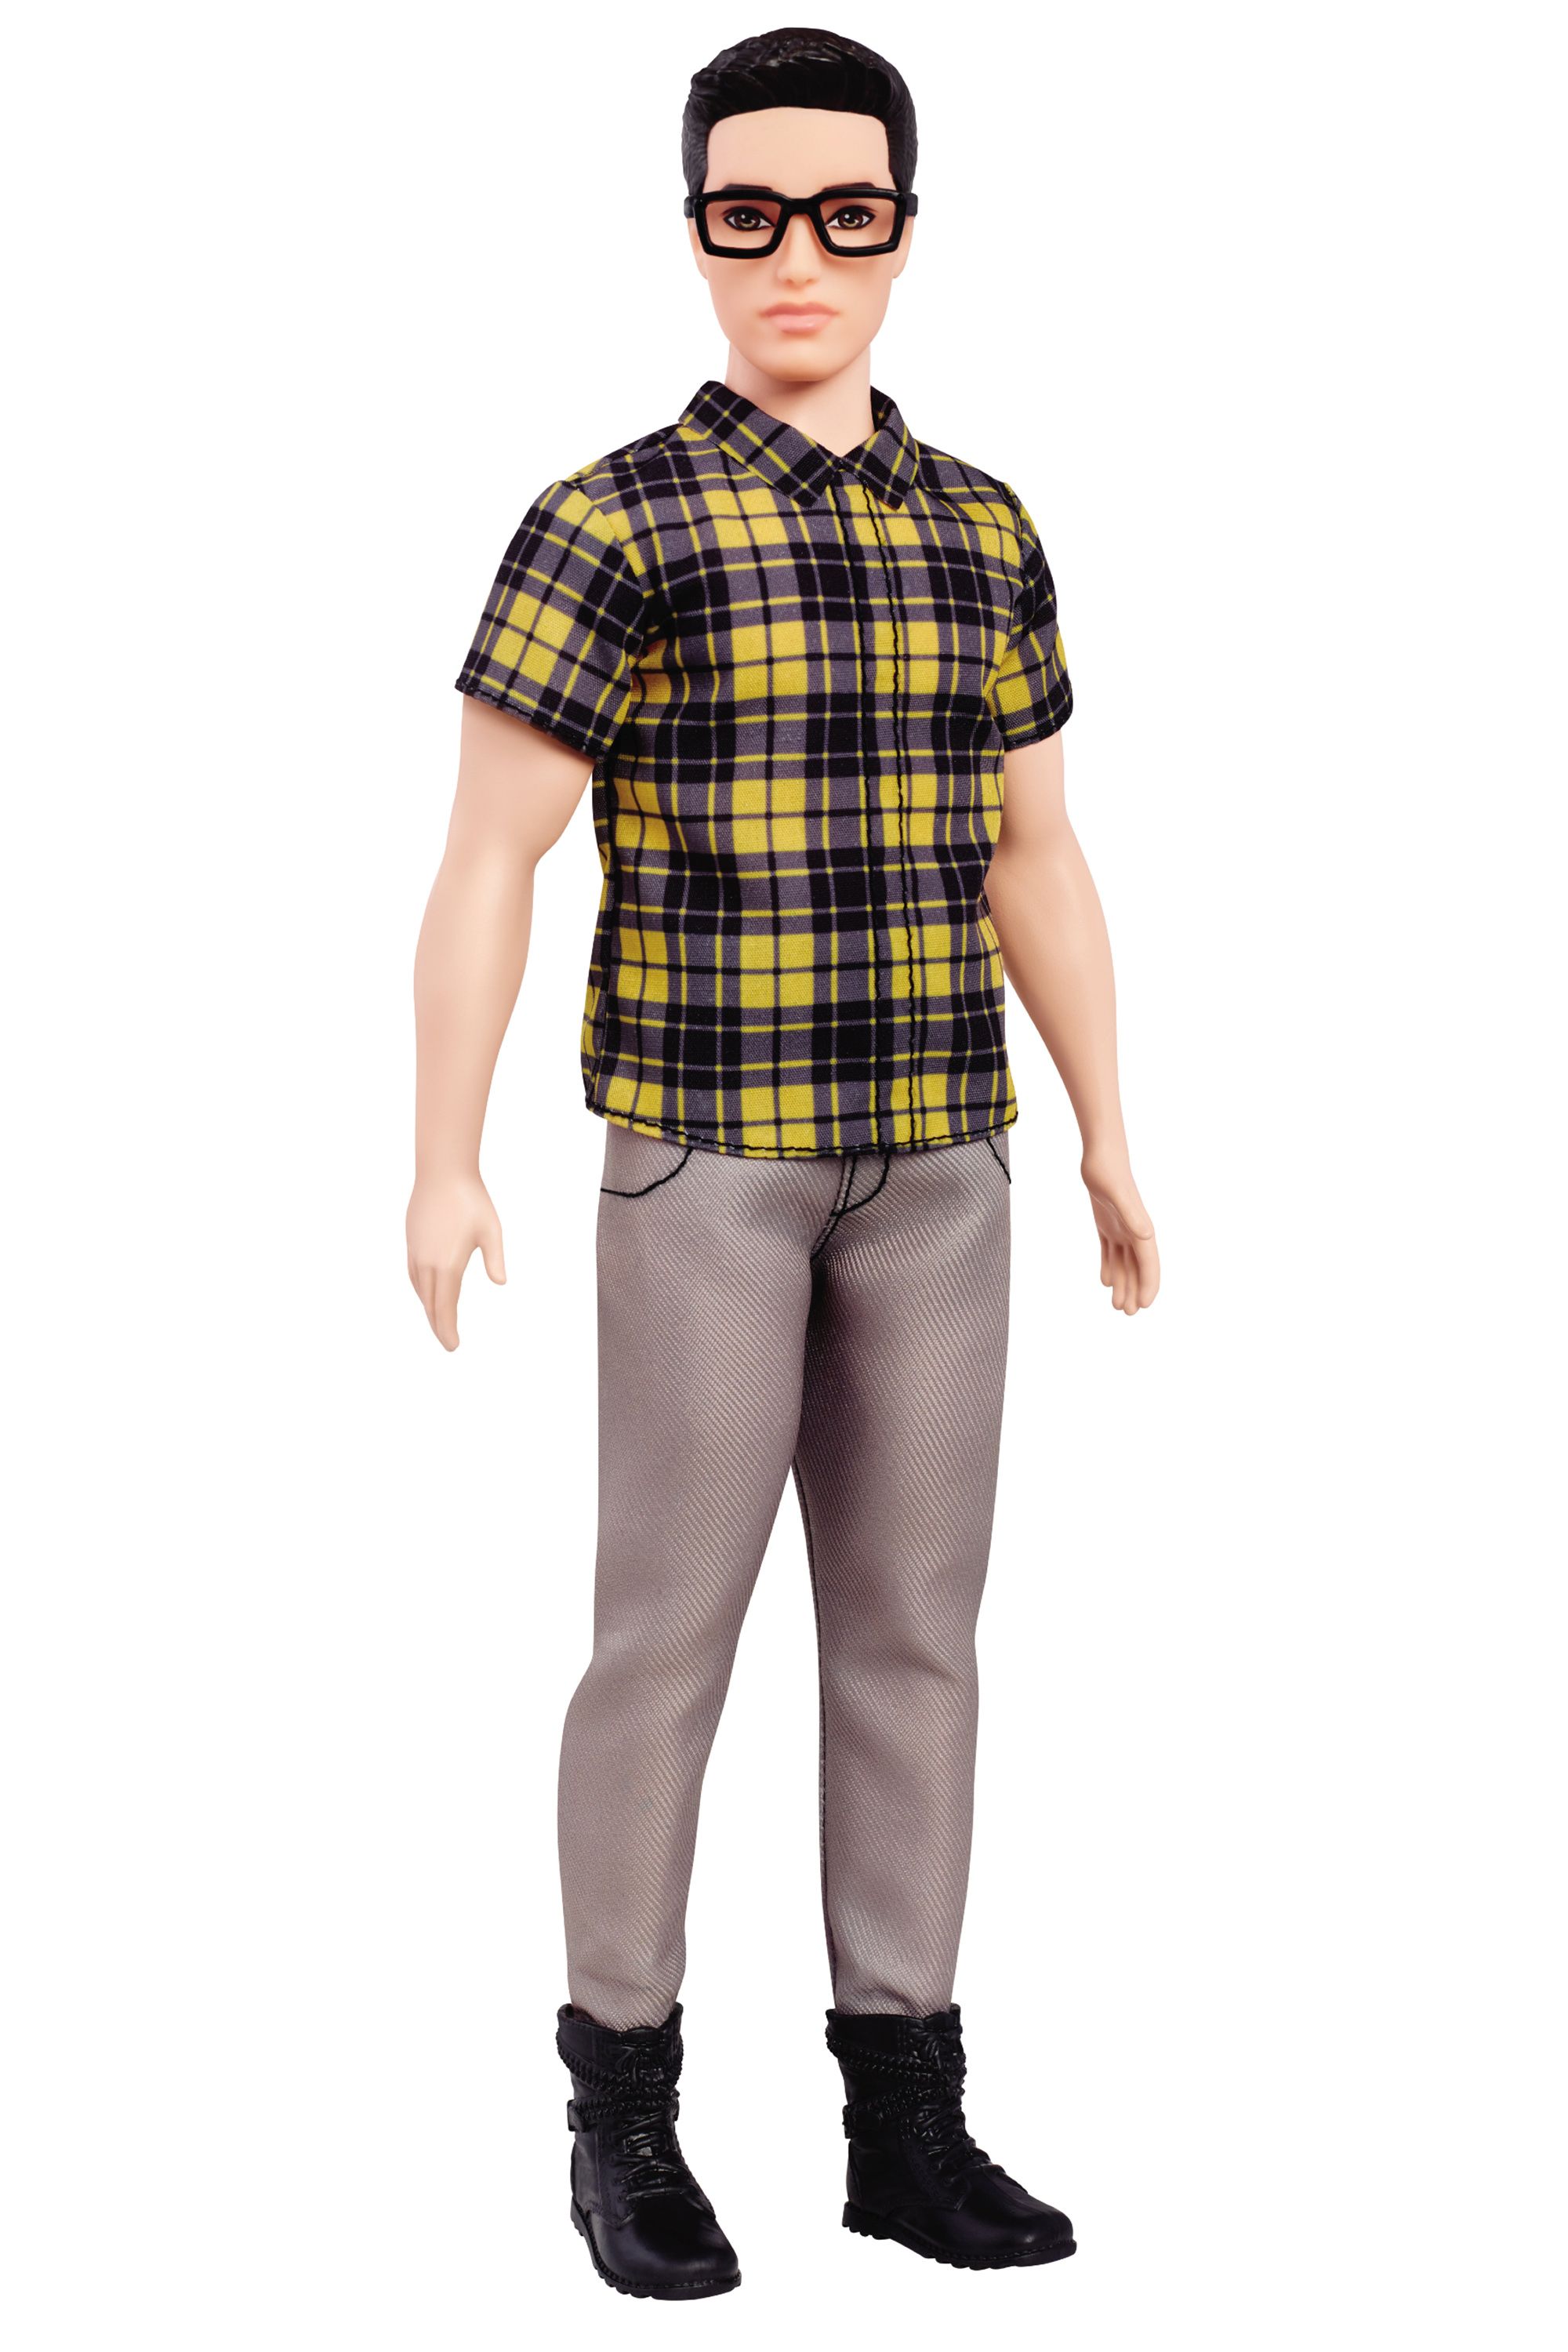 New Plus-size Ken Doll Called 'Broad